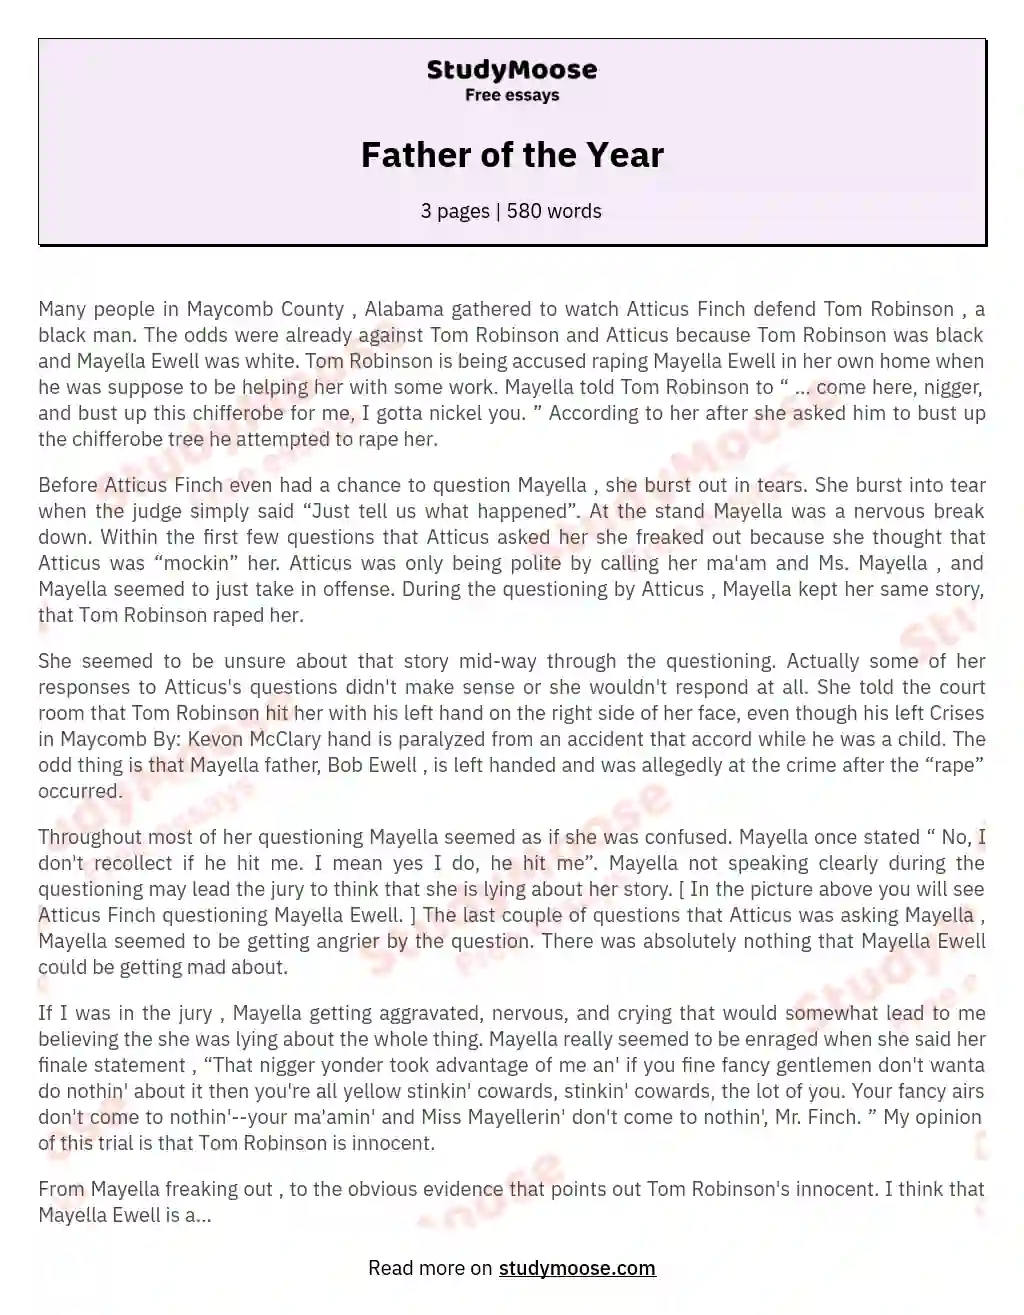 Father of the Year essay